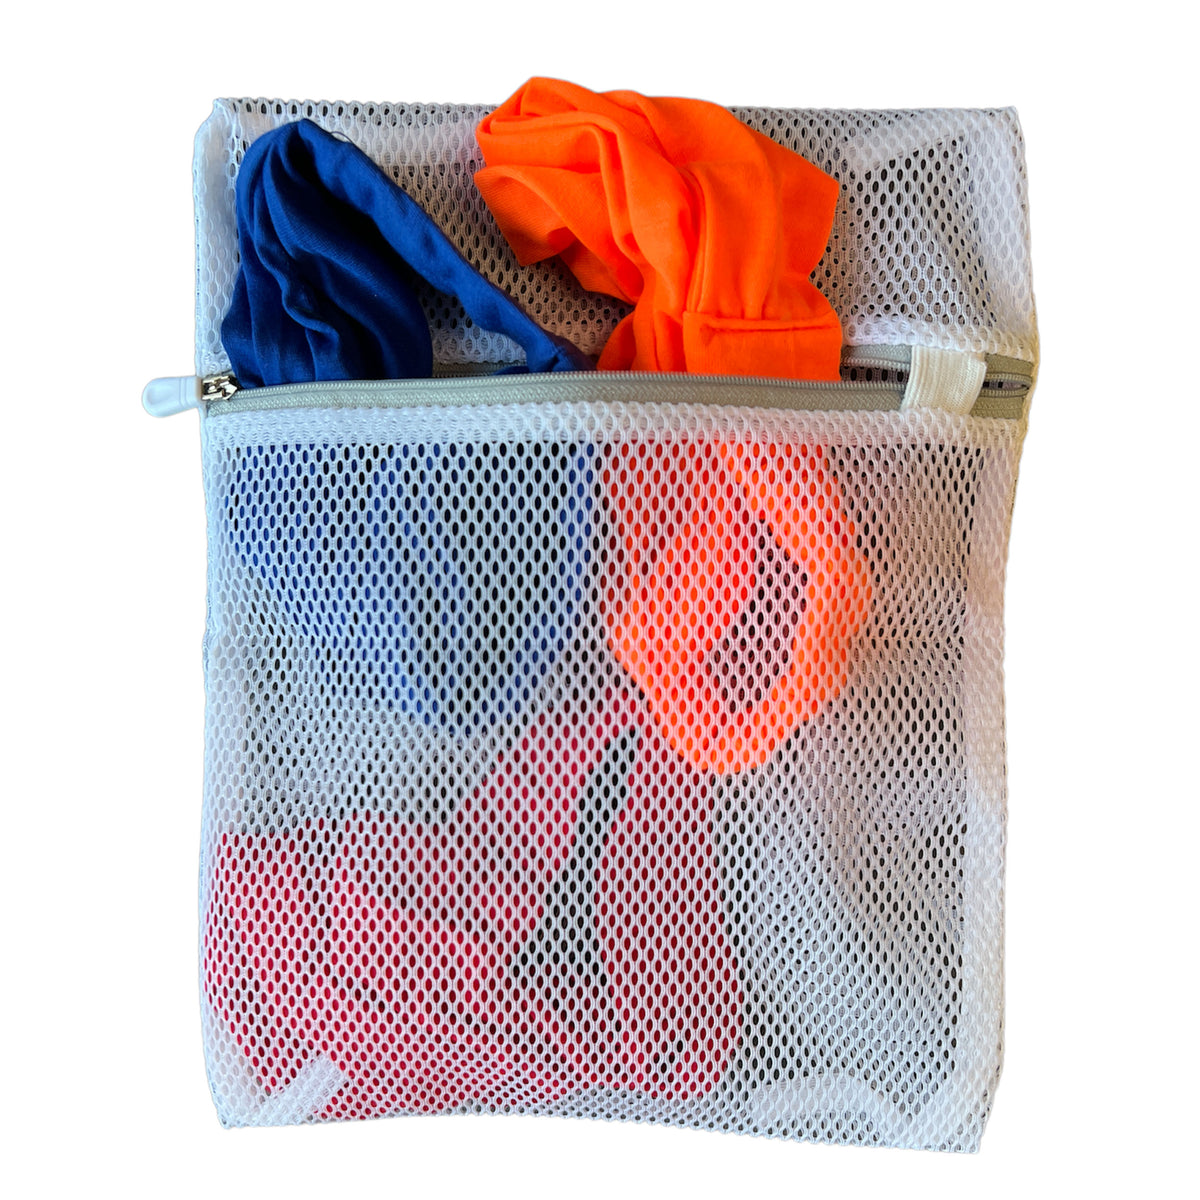 This $7 Laundry Bag Set Protects Bras, Masks, and Socks in the Wash